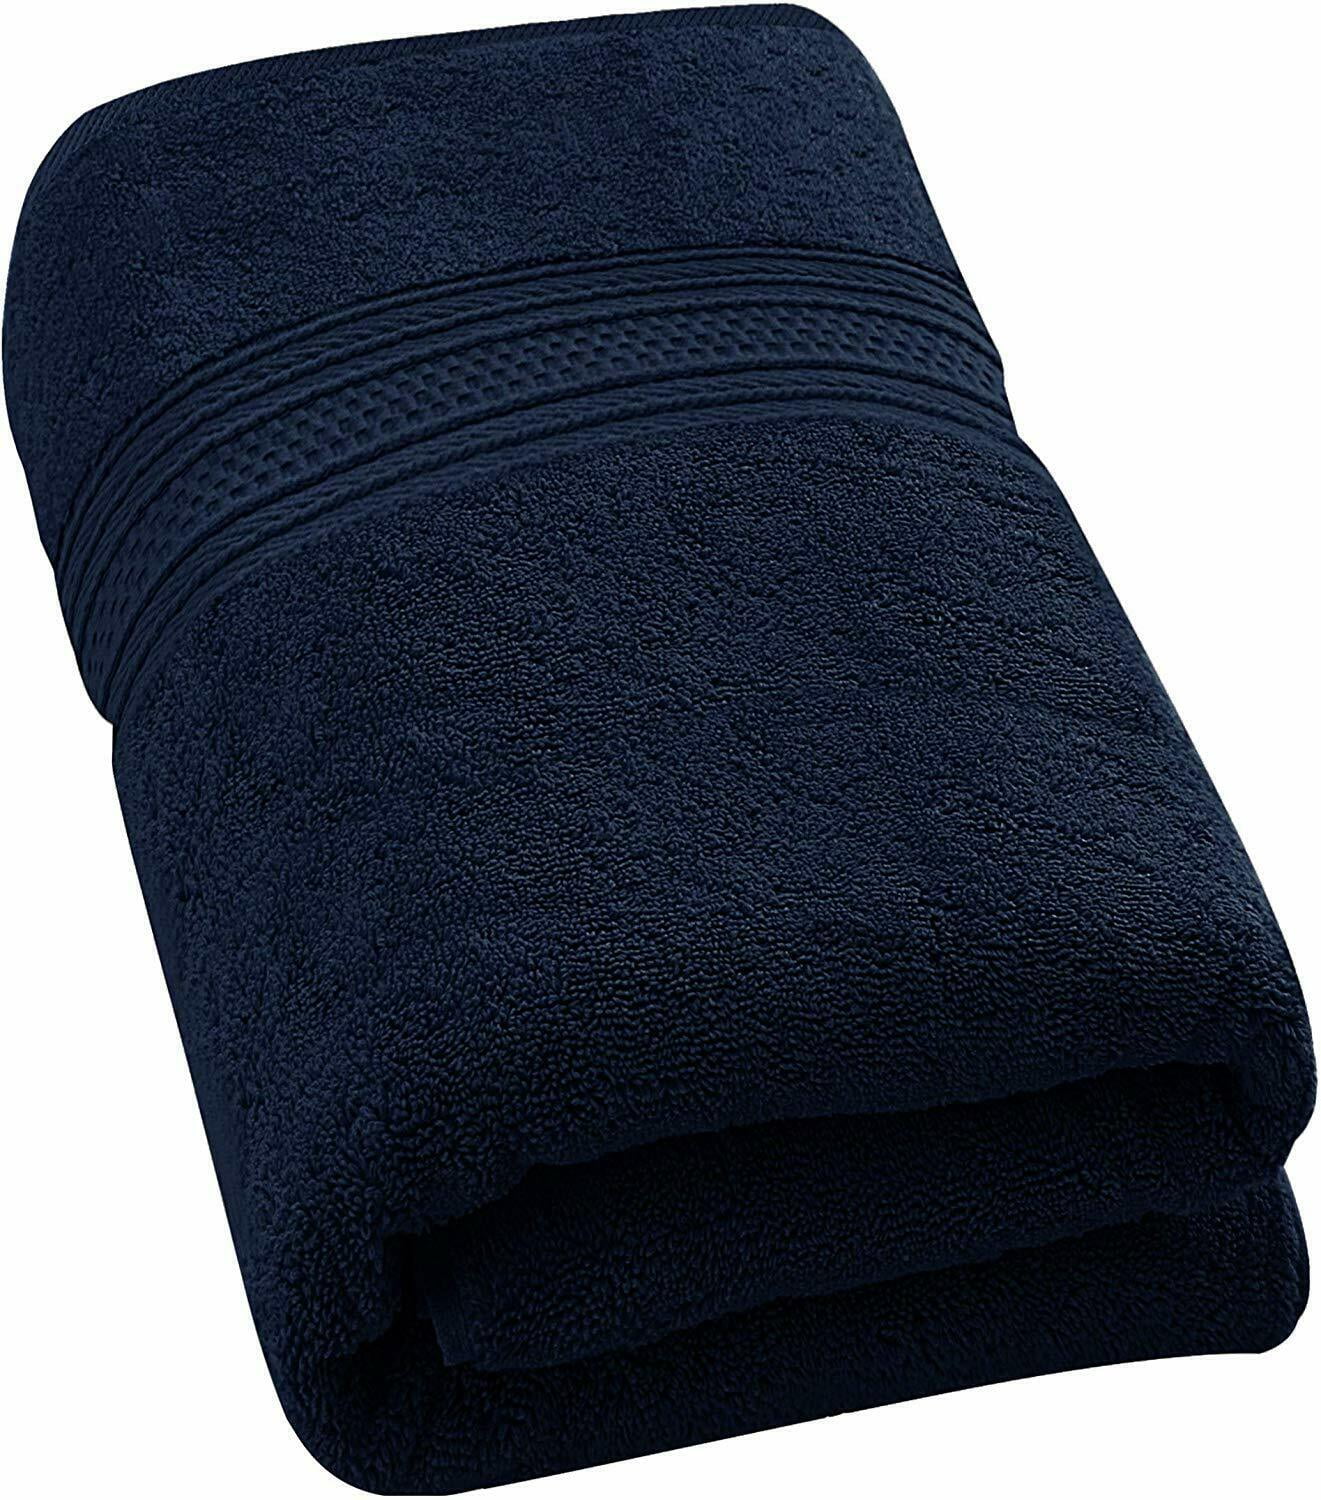 Extra Large Bath Sheets Towels SetPack of 2100% Pure CottonSuper Soft 